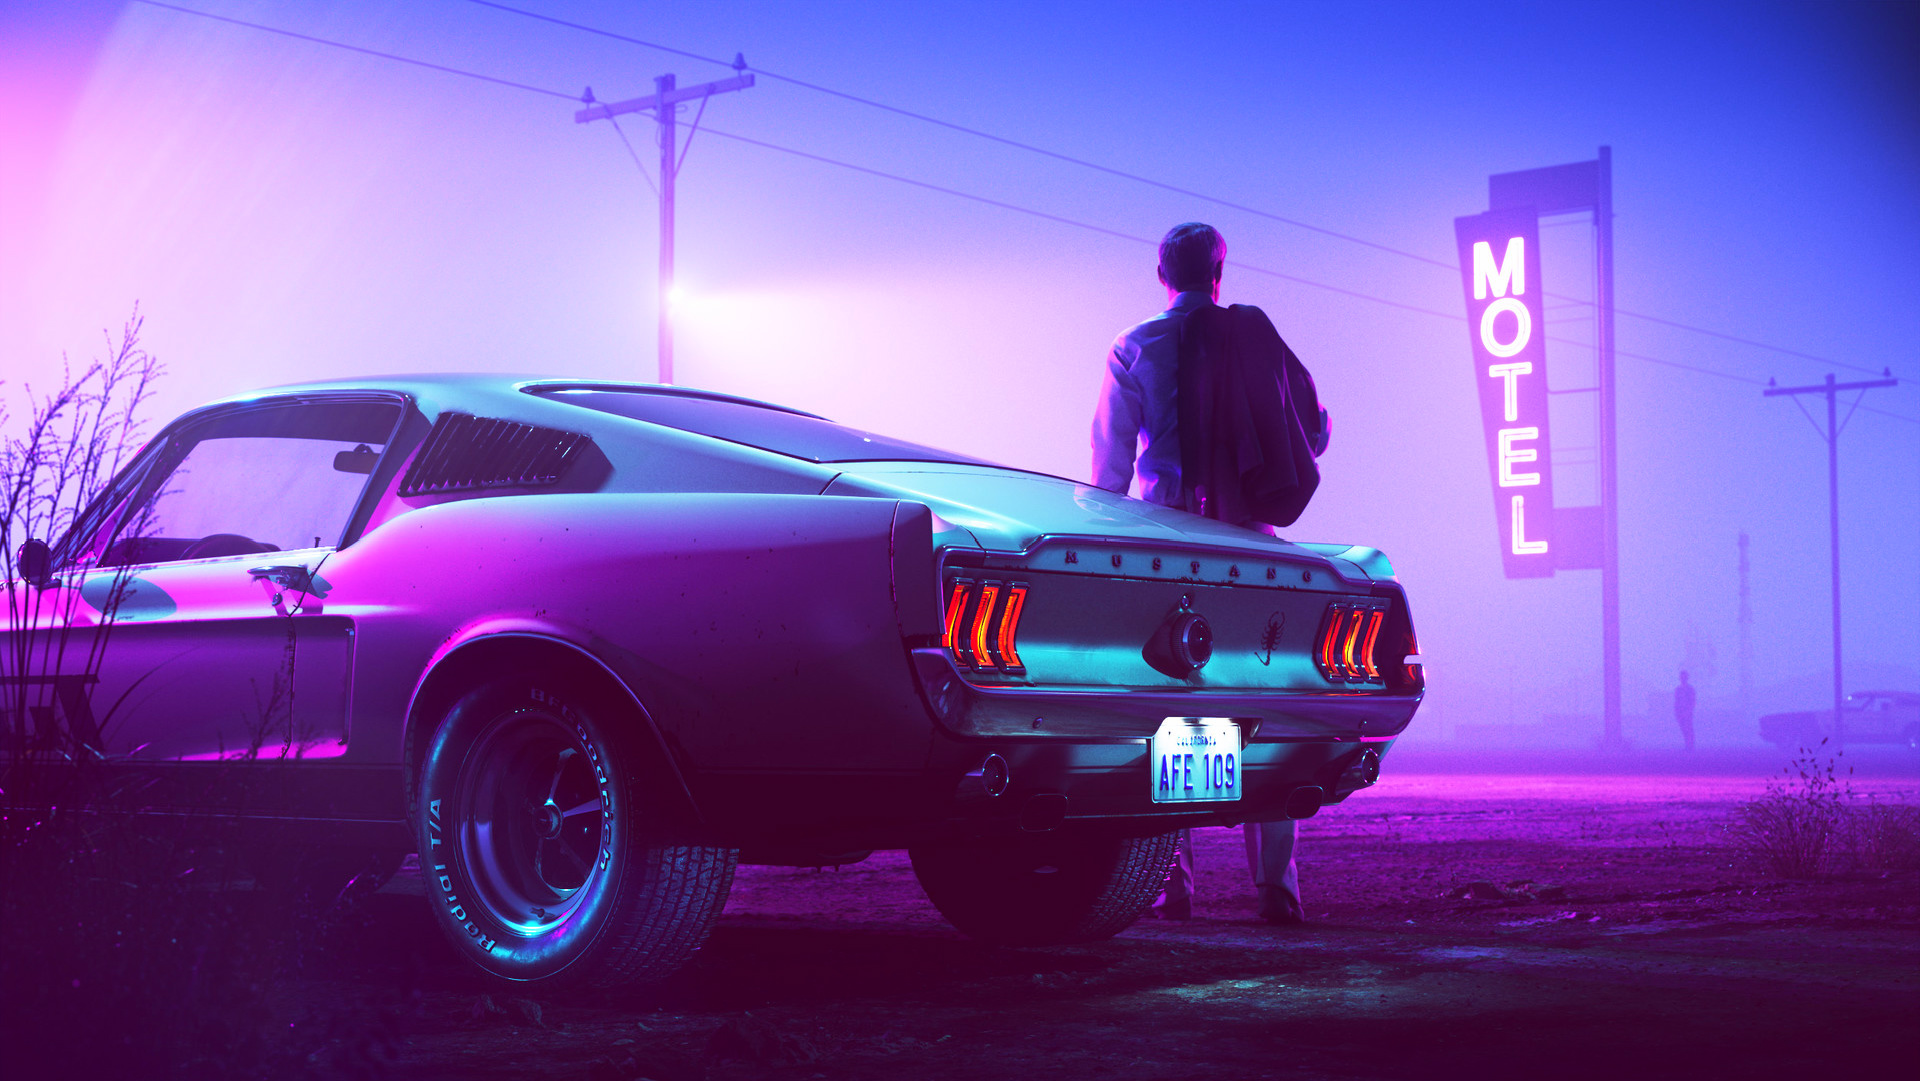 1967 Mustang Fastback, Car, Vehicle, Retrowave,  retrowave, Synthwave, Neon, Drive Wallpaper